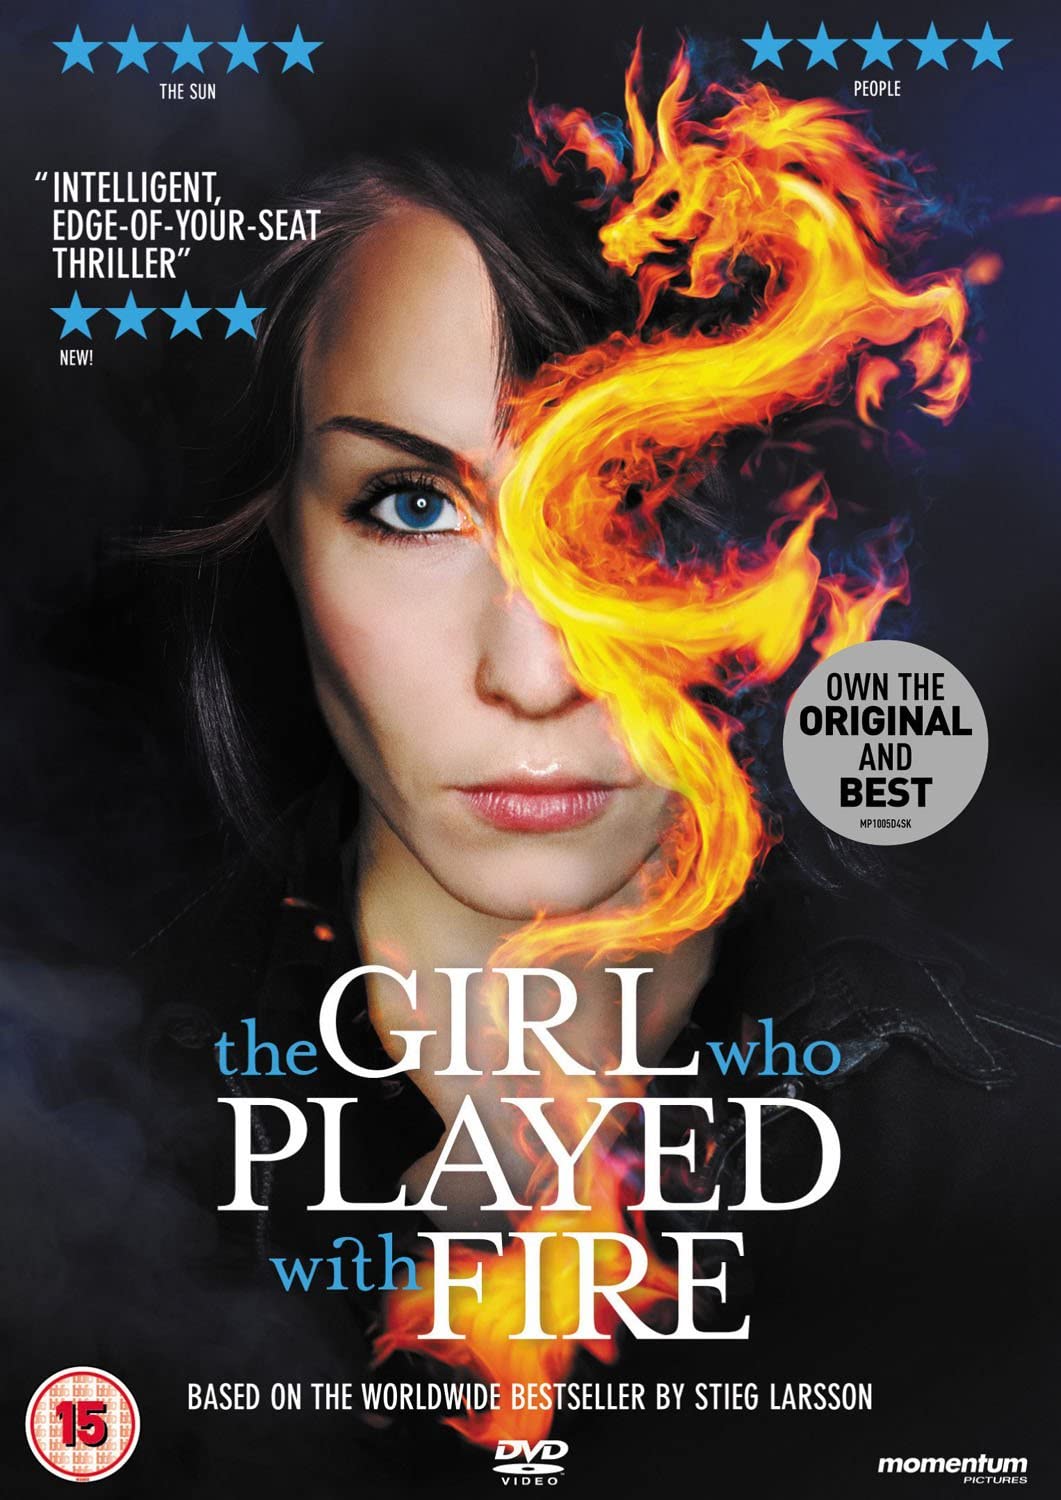 The Girl Who Played With Fire [2010] - Thriller/Mystery [DVD]